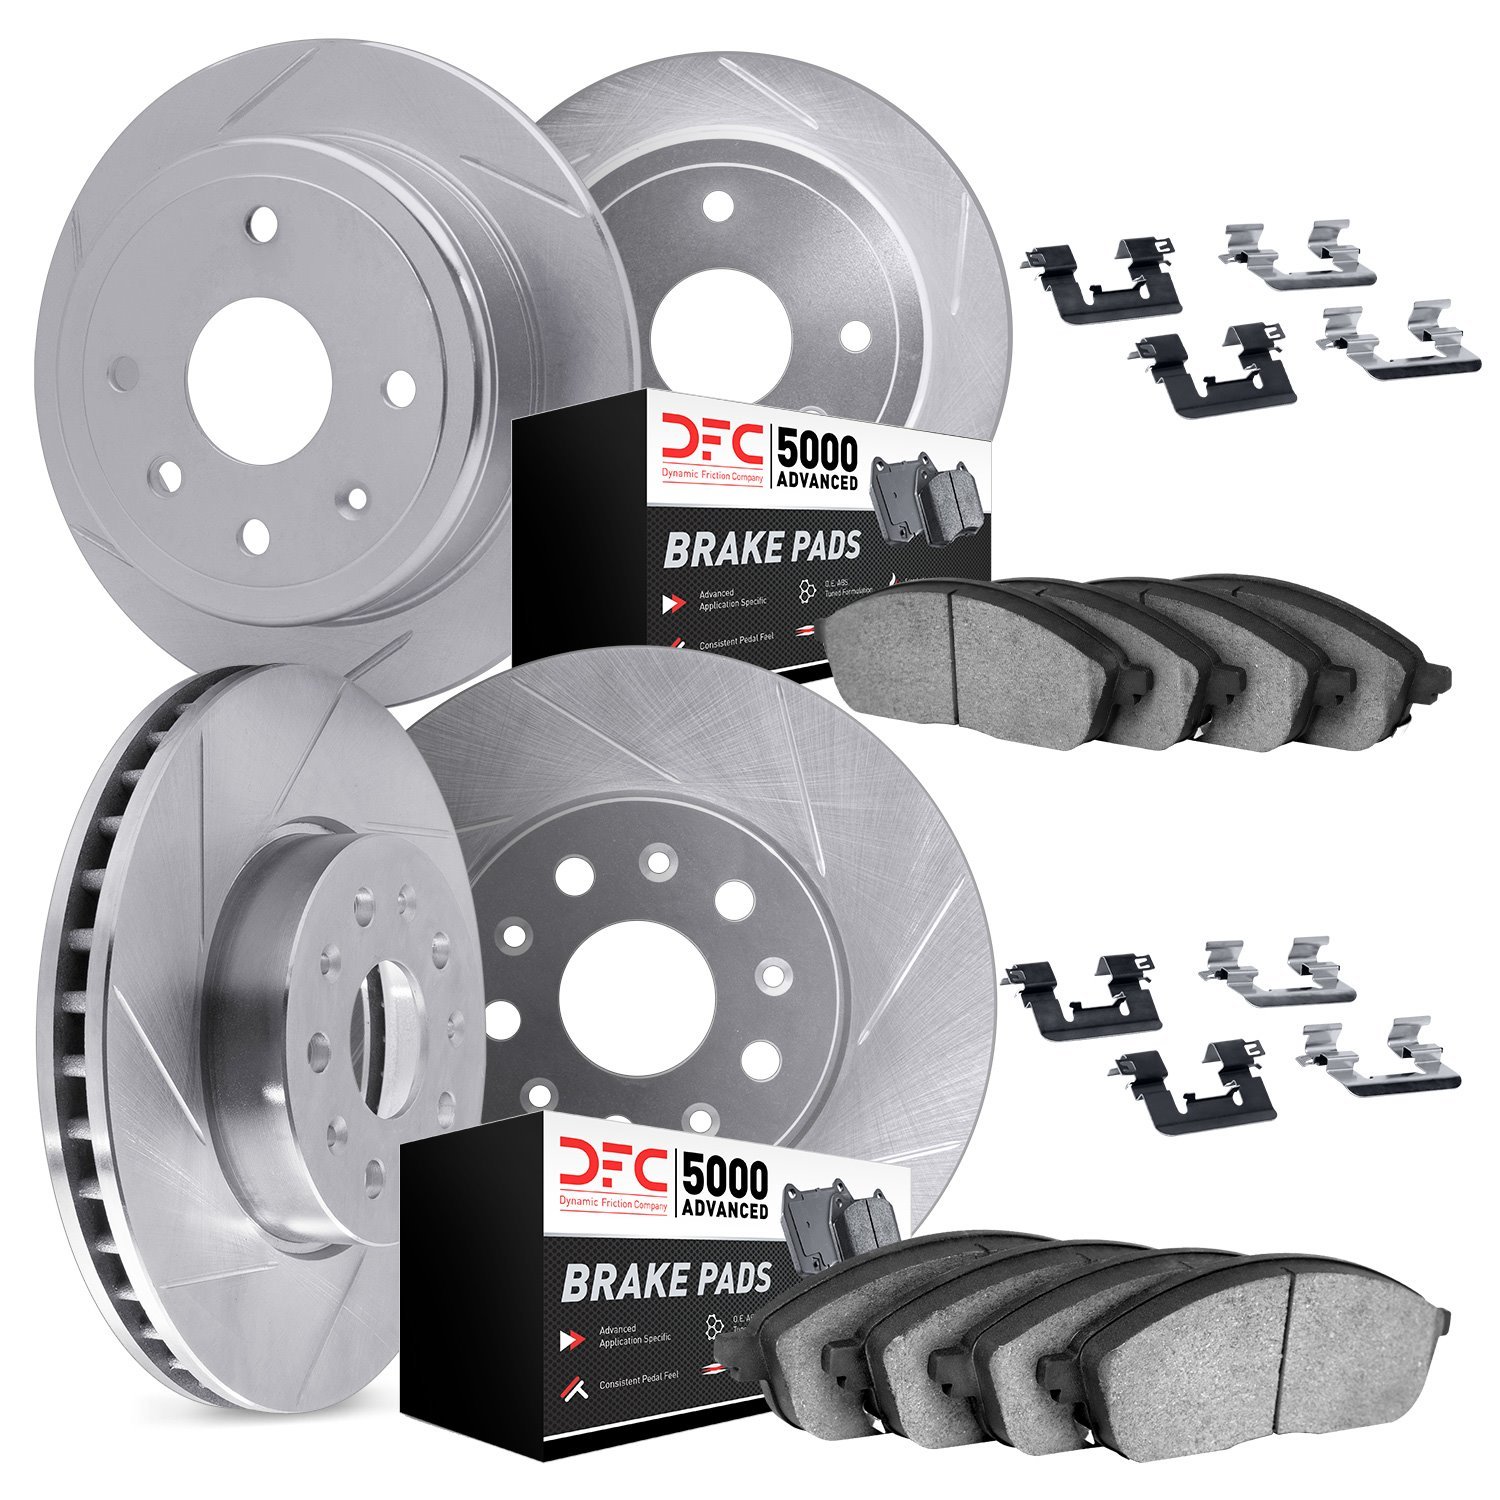 5514-11005 Slotted Brake Rotors w/5000 Advanced Brake Pads Kit & Hardware [Silver], 1994-2002 Land Rover, Position: Front and Re